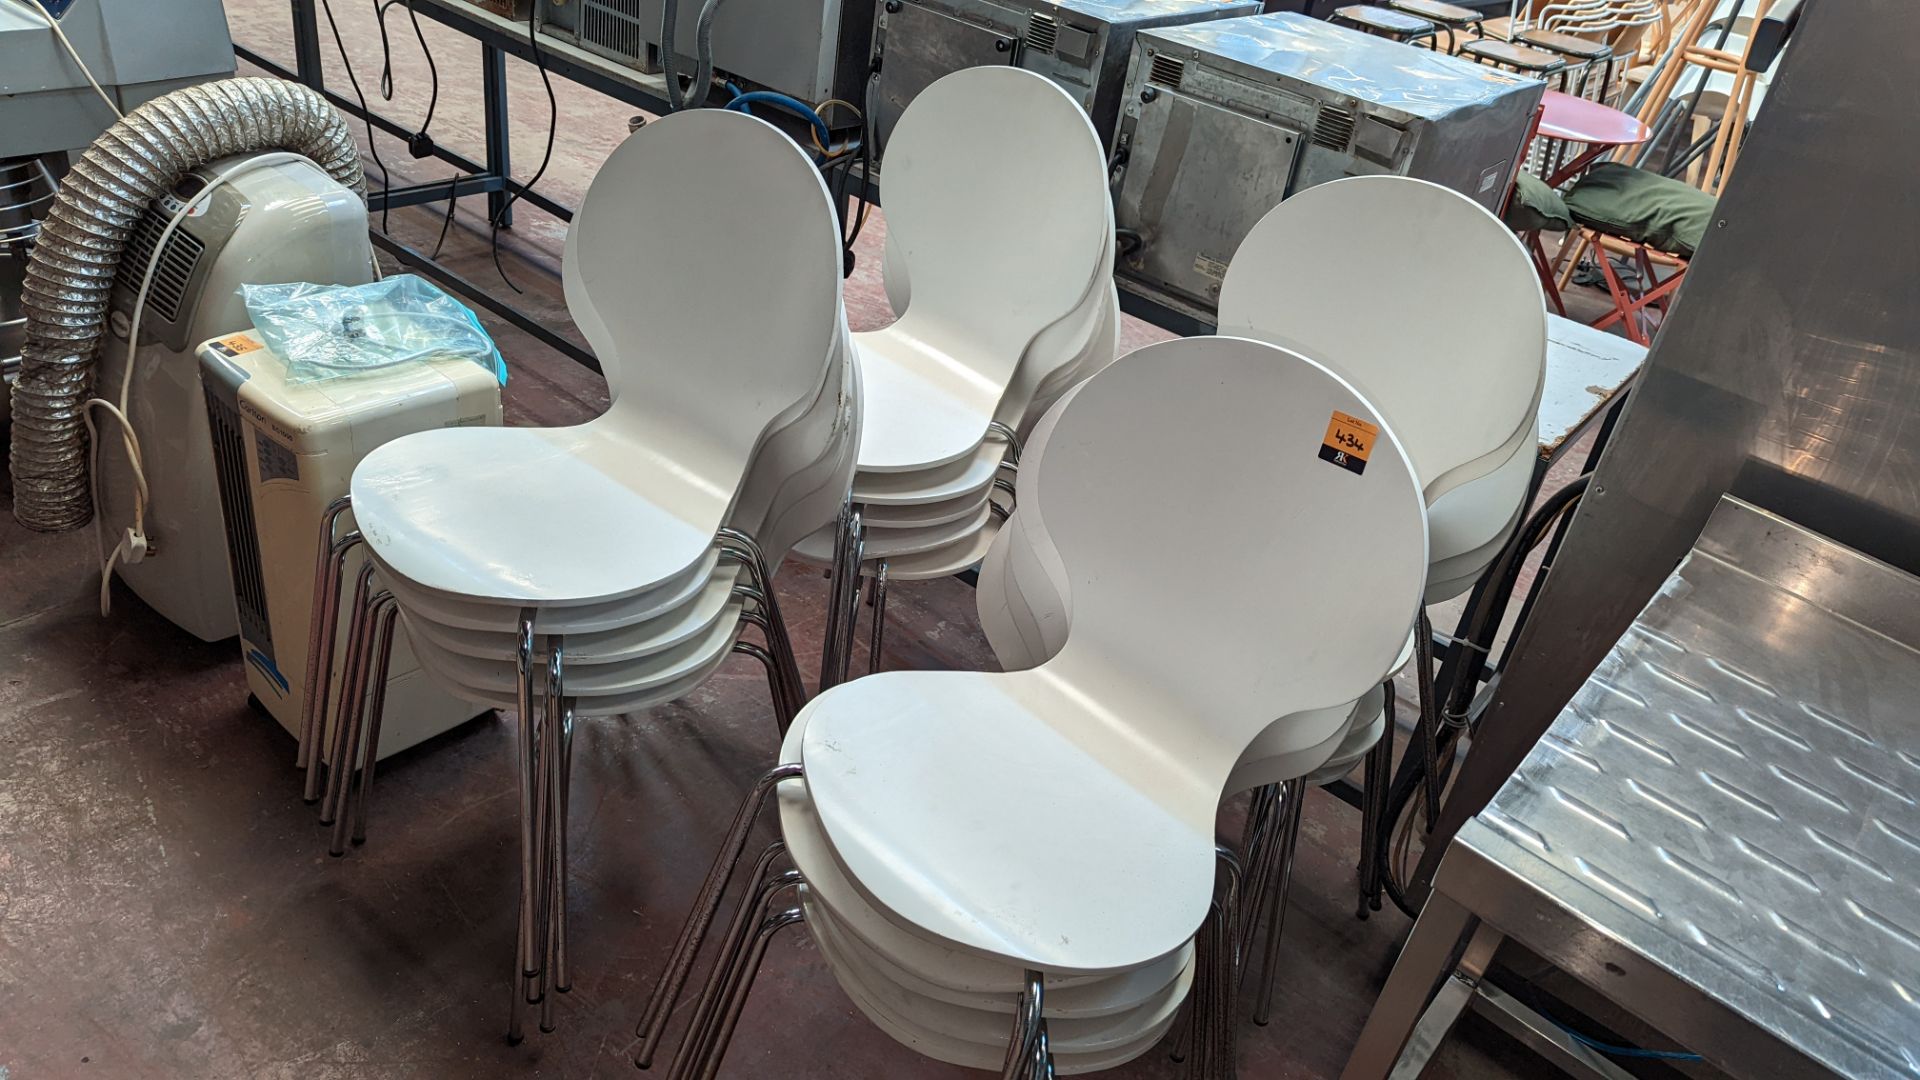 20 matching stacking chairs in white painted wood on chrome bases - Image 2 of 6